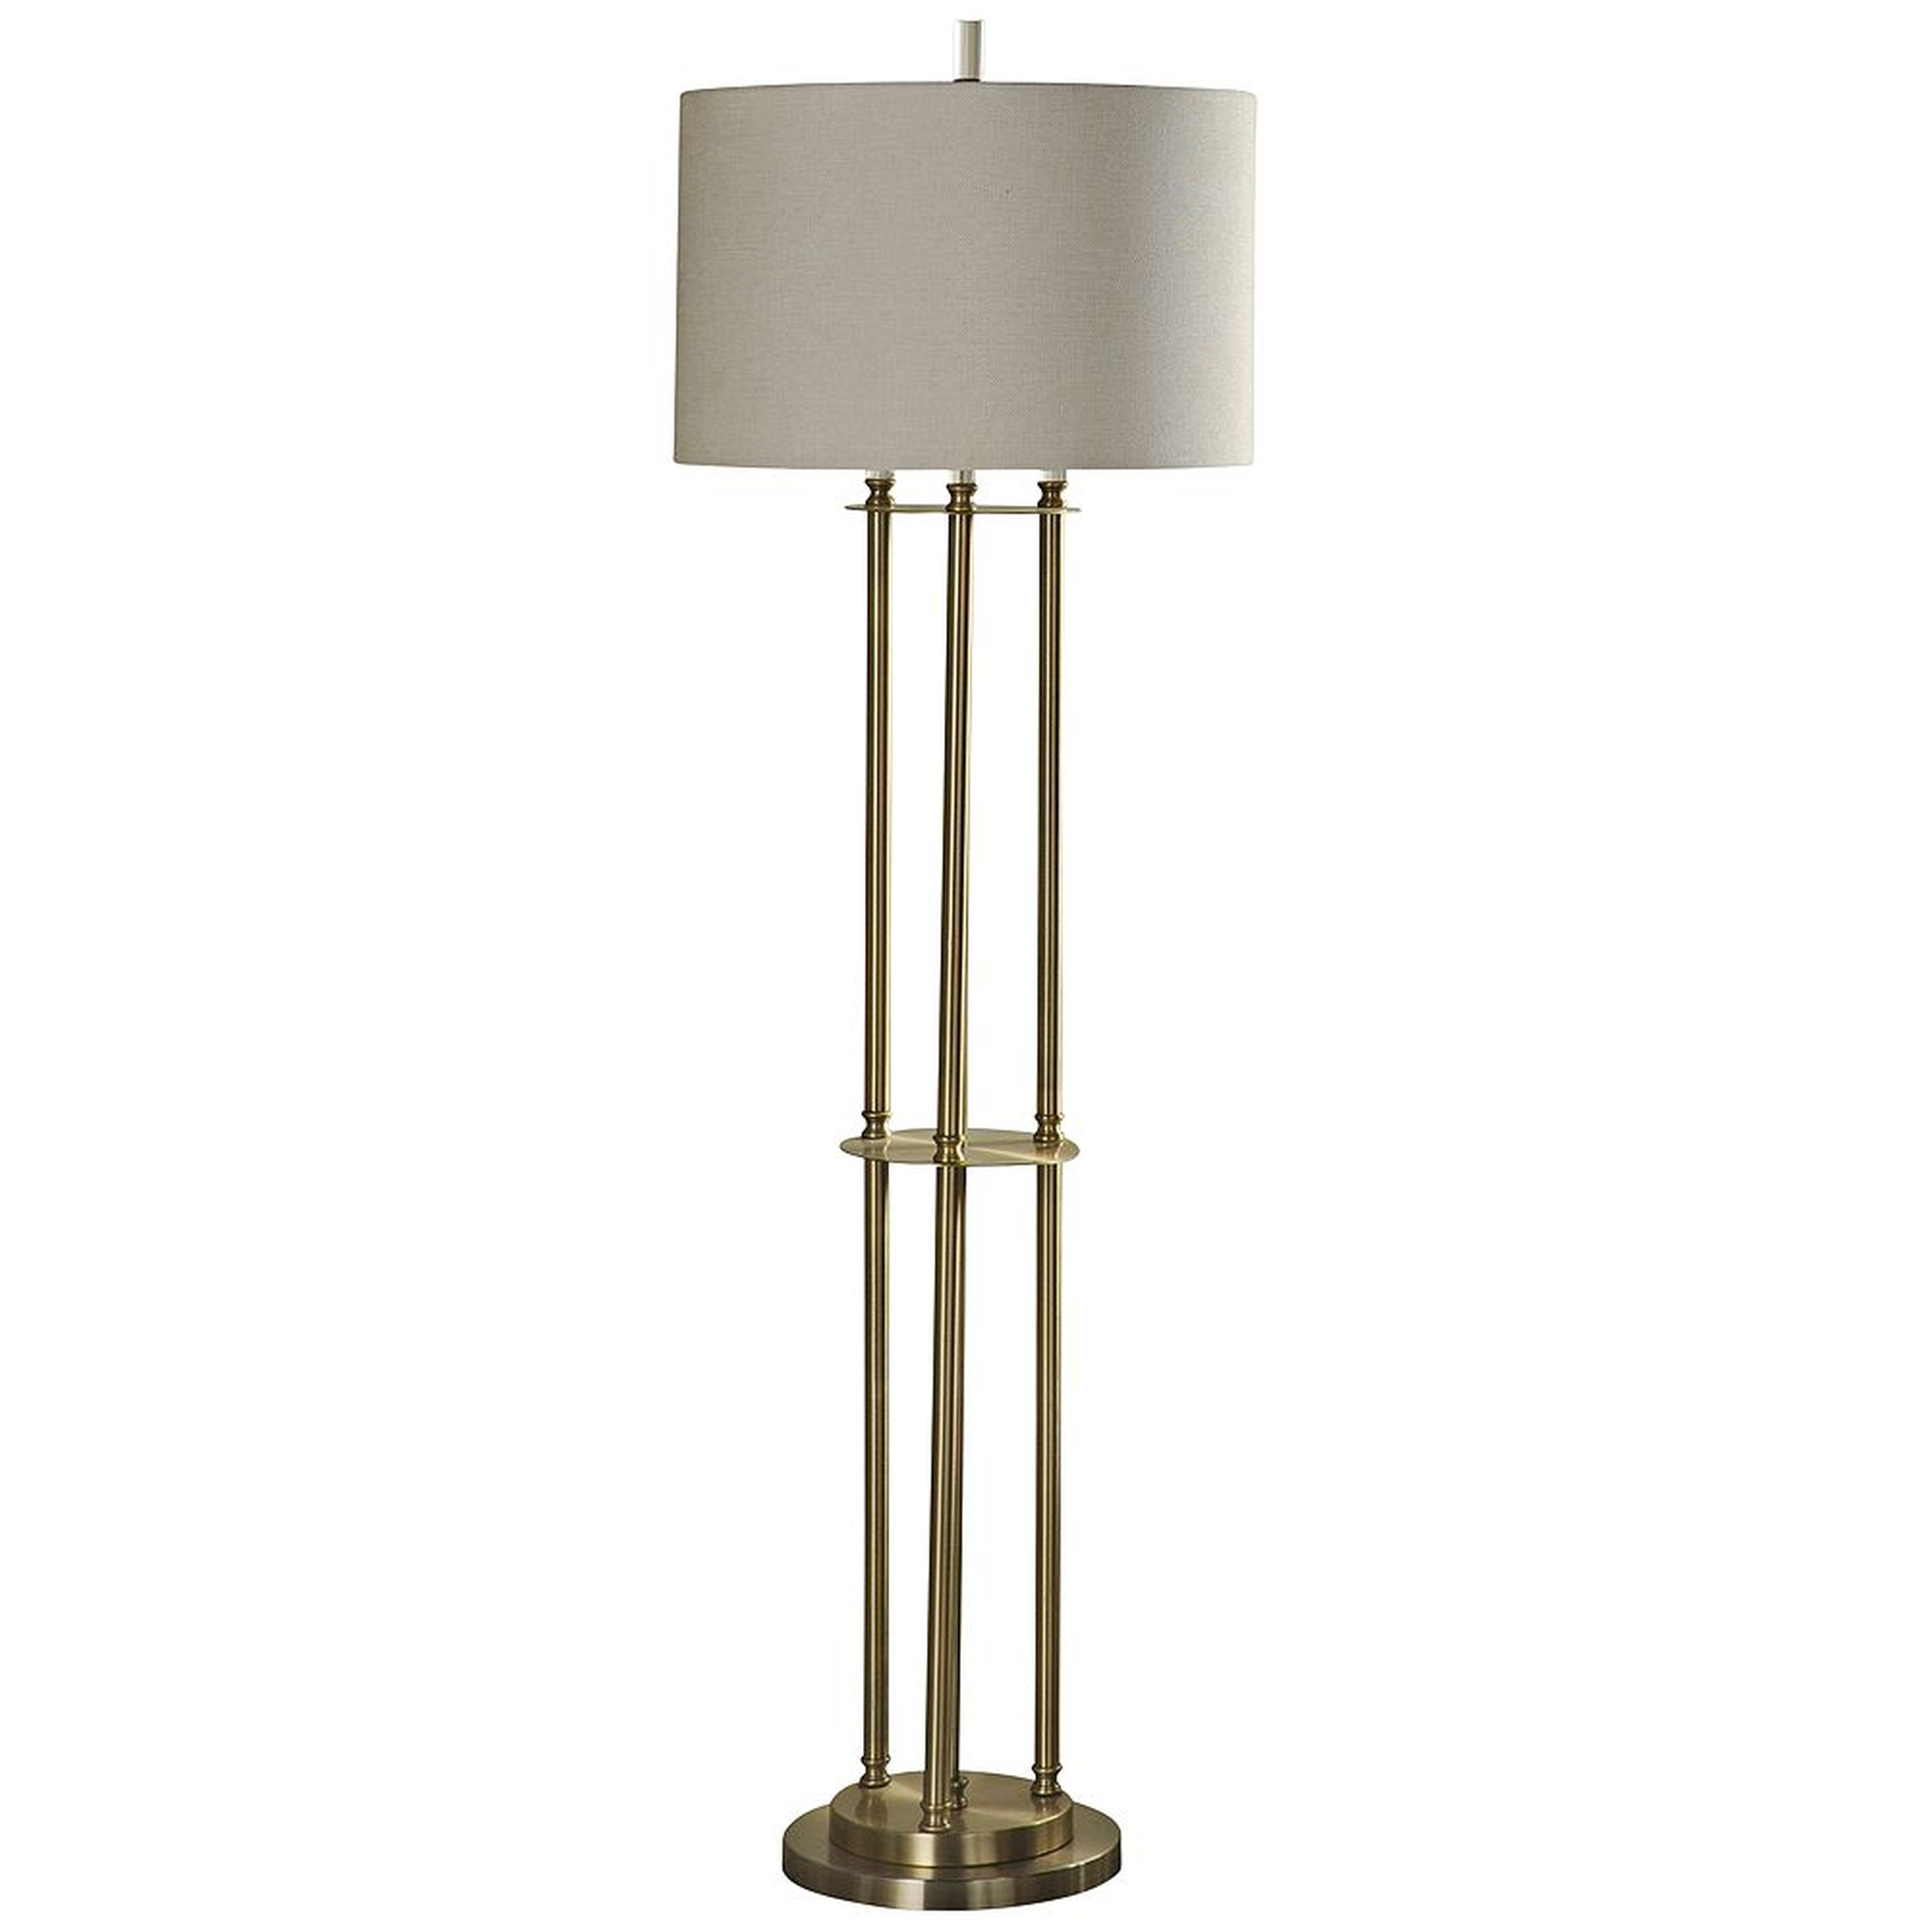 Brass Column Floor Lamp with Taupe Fabric Shade - Style # 66C63 - Lamps Plus